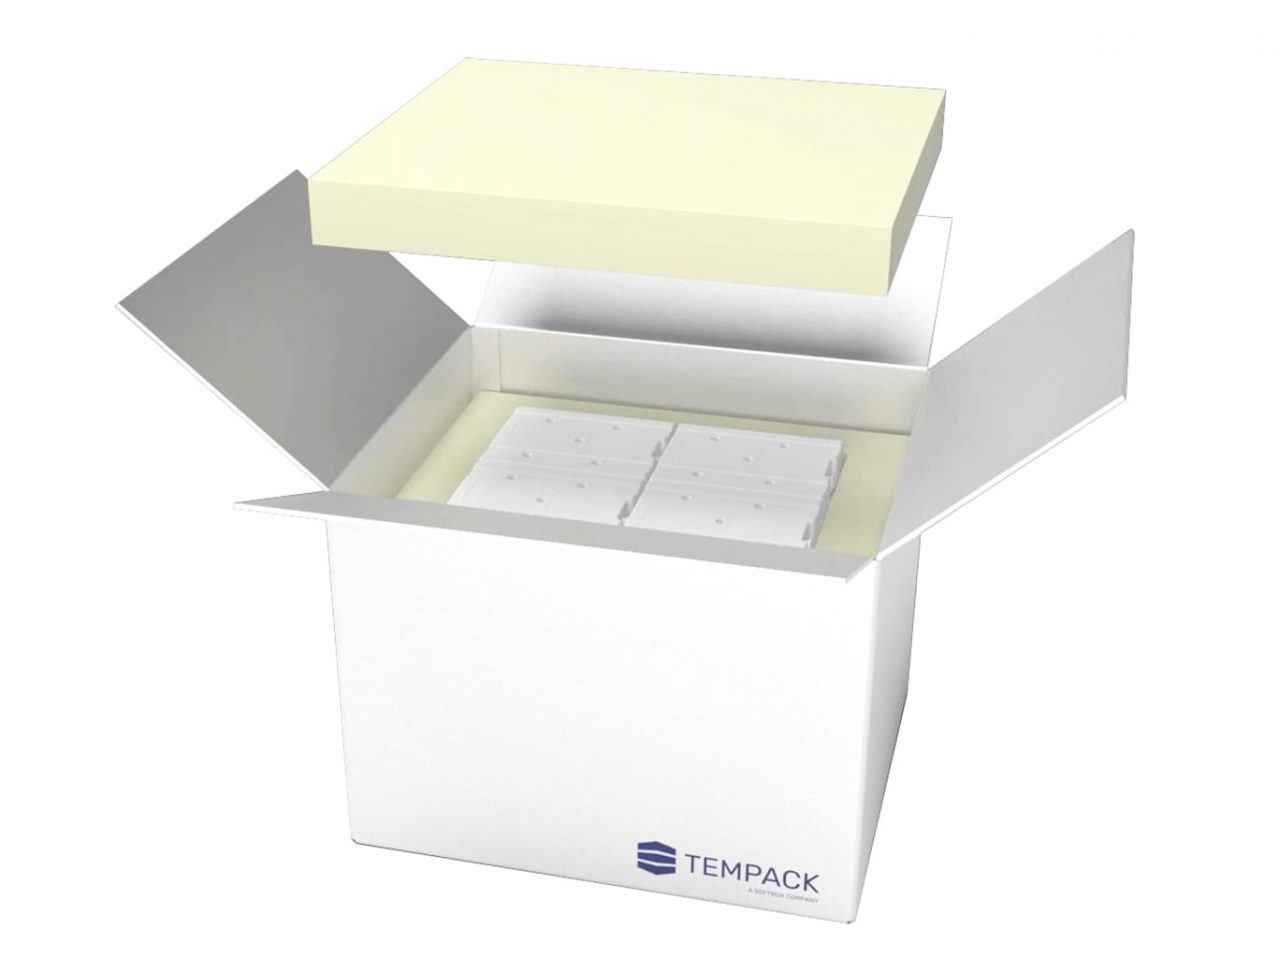 tempack-prequalified-solutions-biotech-72-1@2x-1280x958